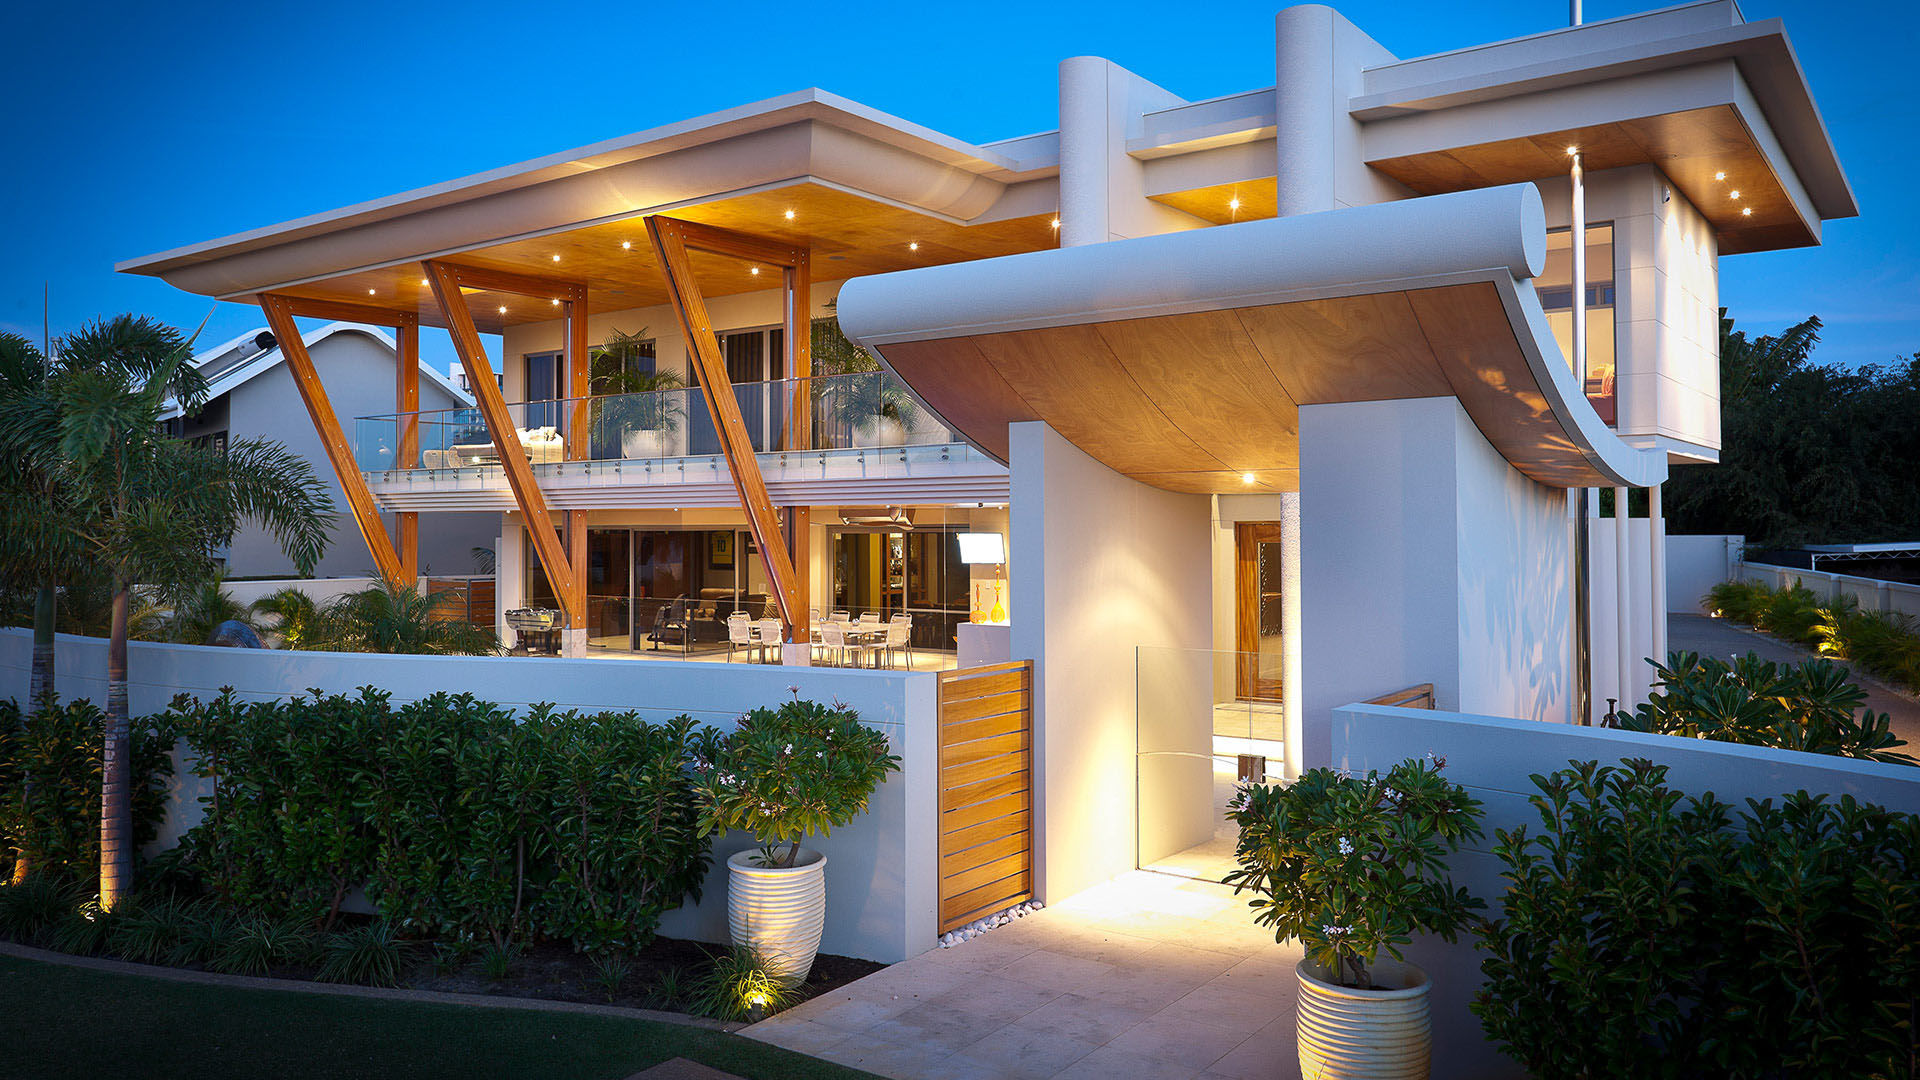 Modern Residential Architecture Trends Iconic Designs That Will Shape The Next Five Years